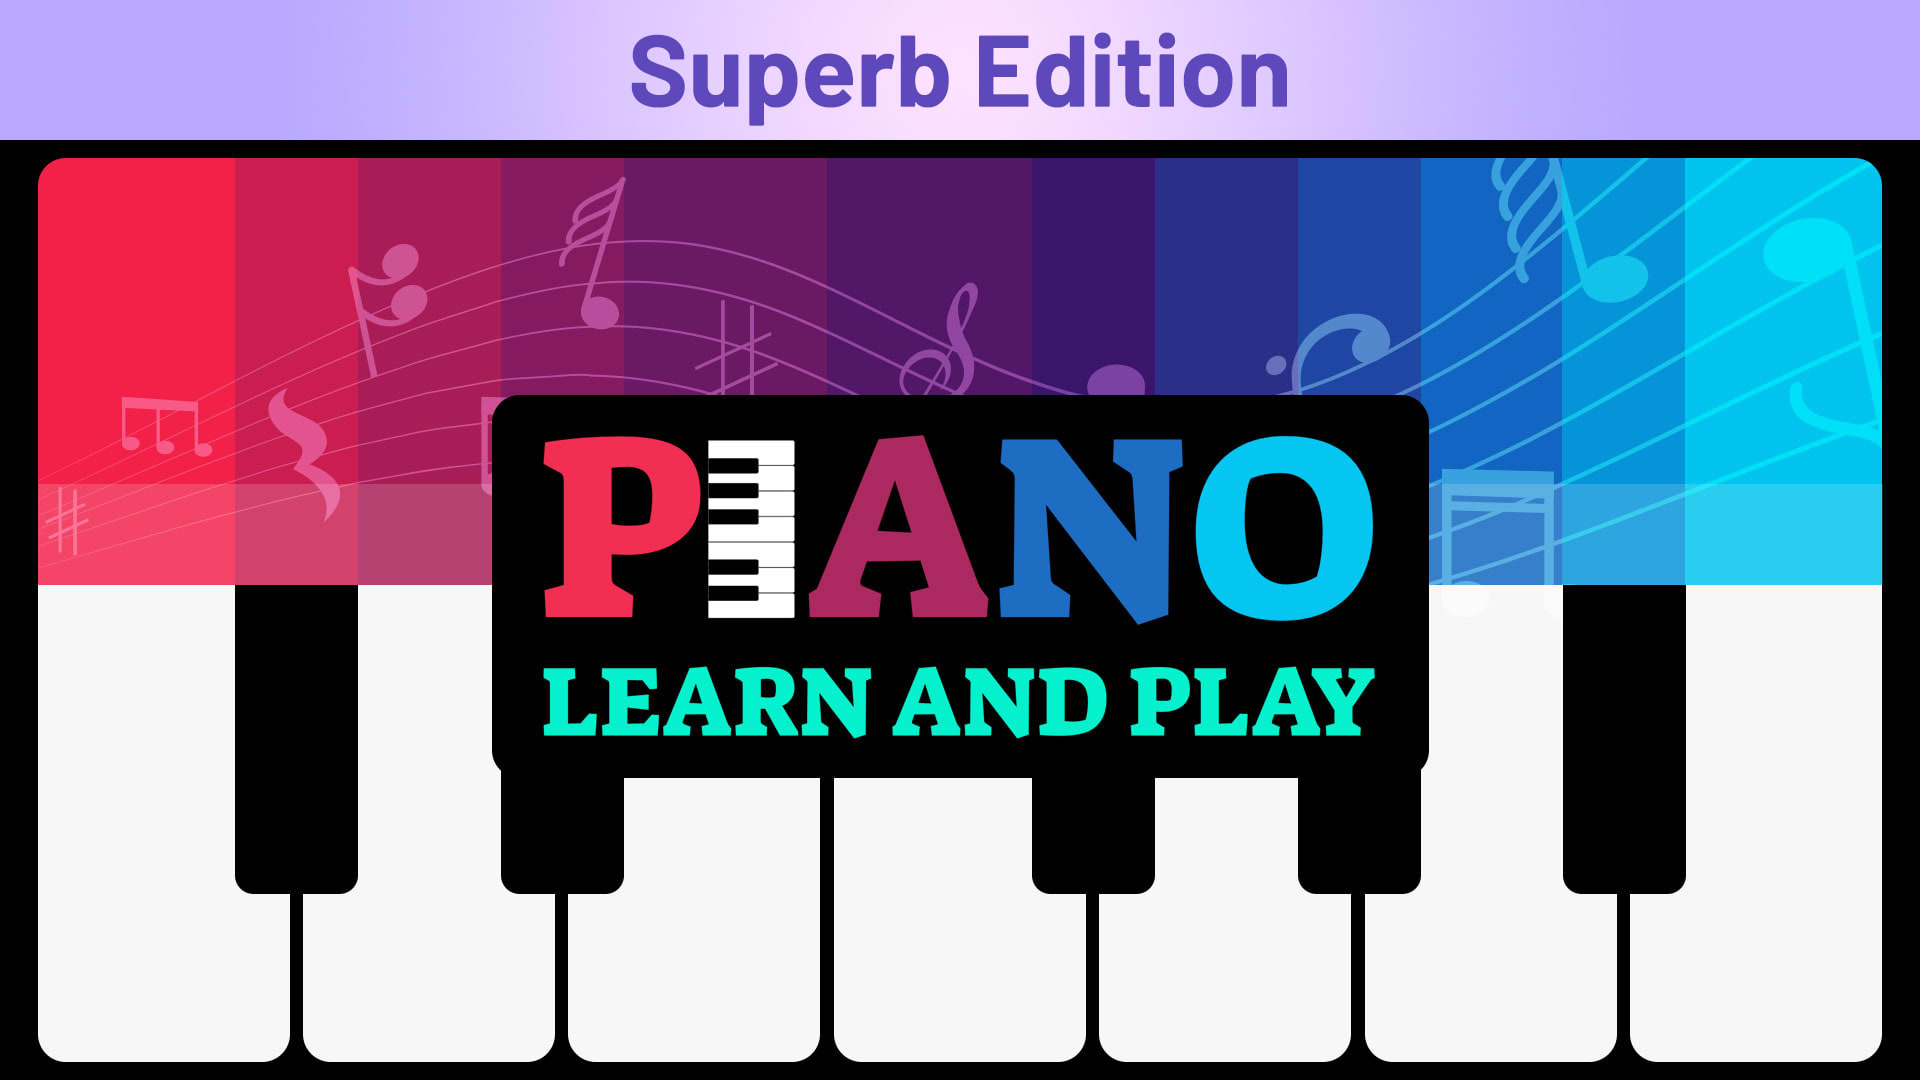 Piano: Learn and Play Superb Edition